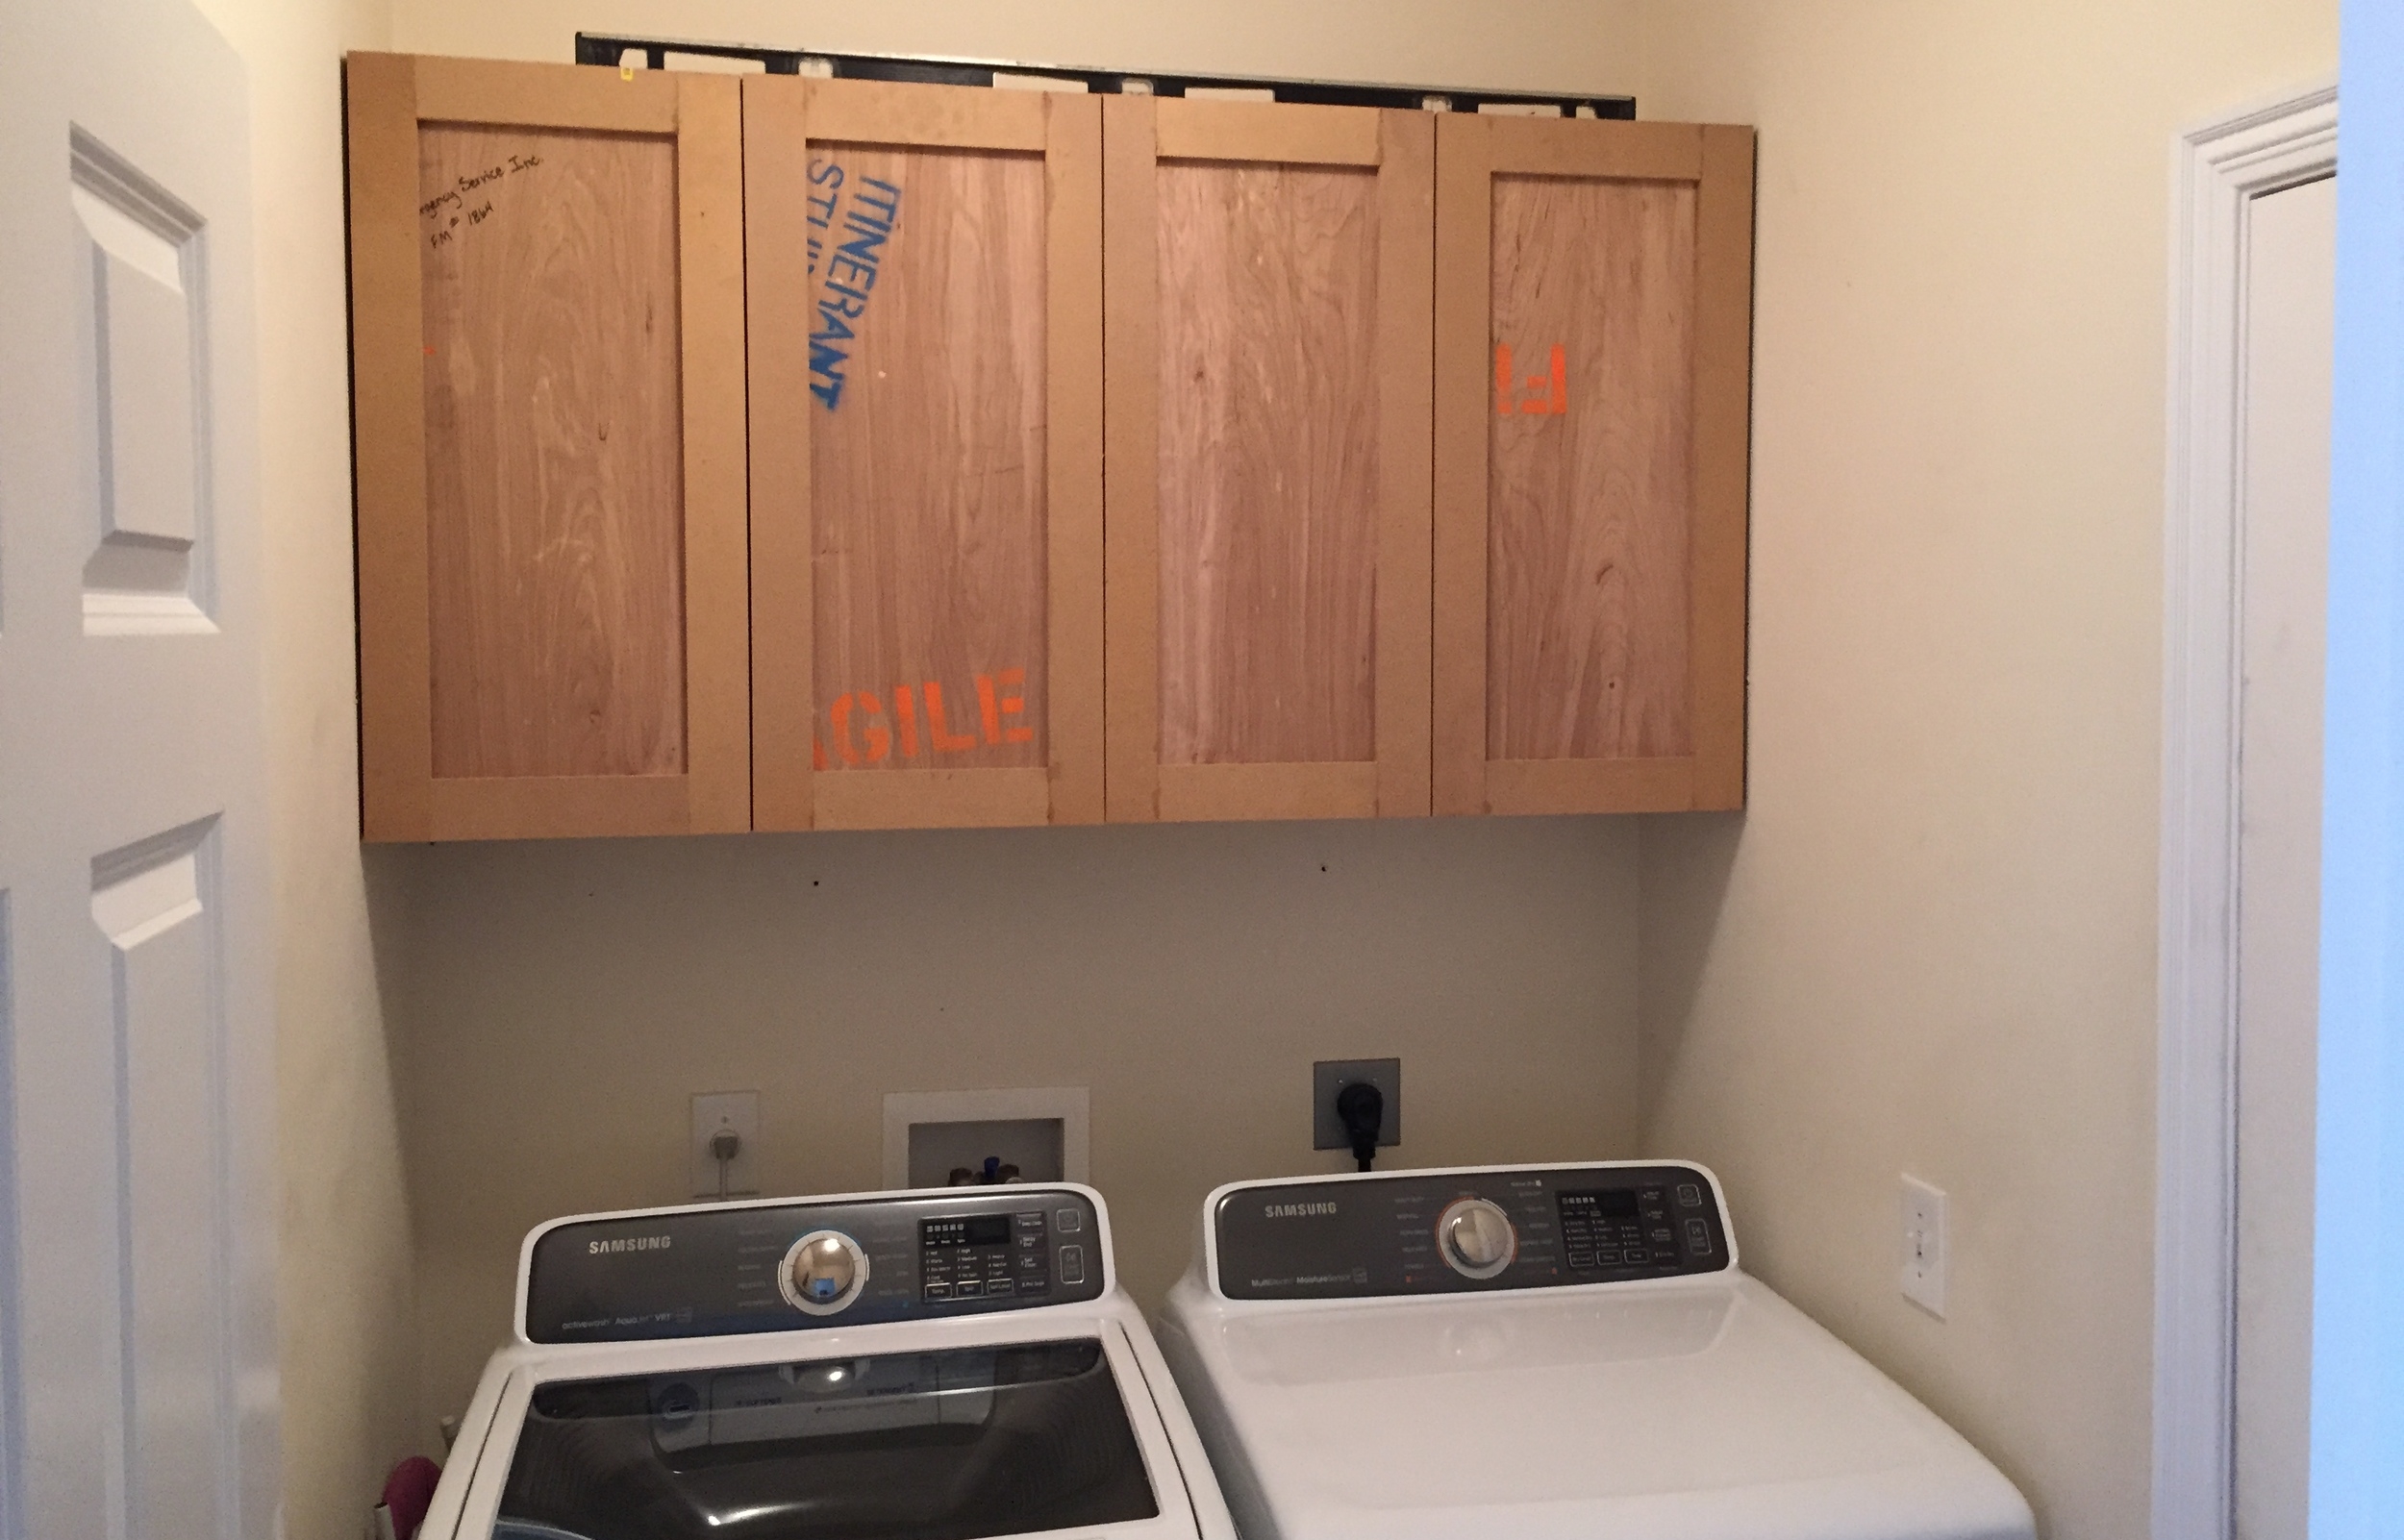 How To Build Upper Cabinets Laundry Room Makeover Revival Woodworks - Diy Install Laundry Room Cabinets